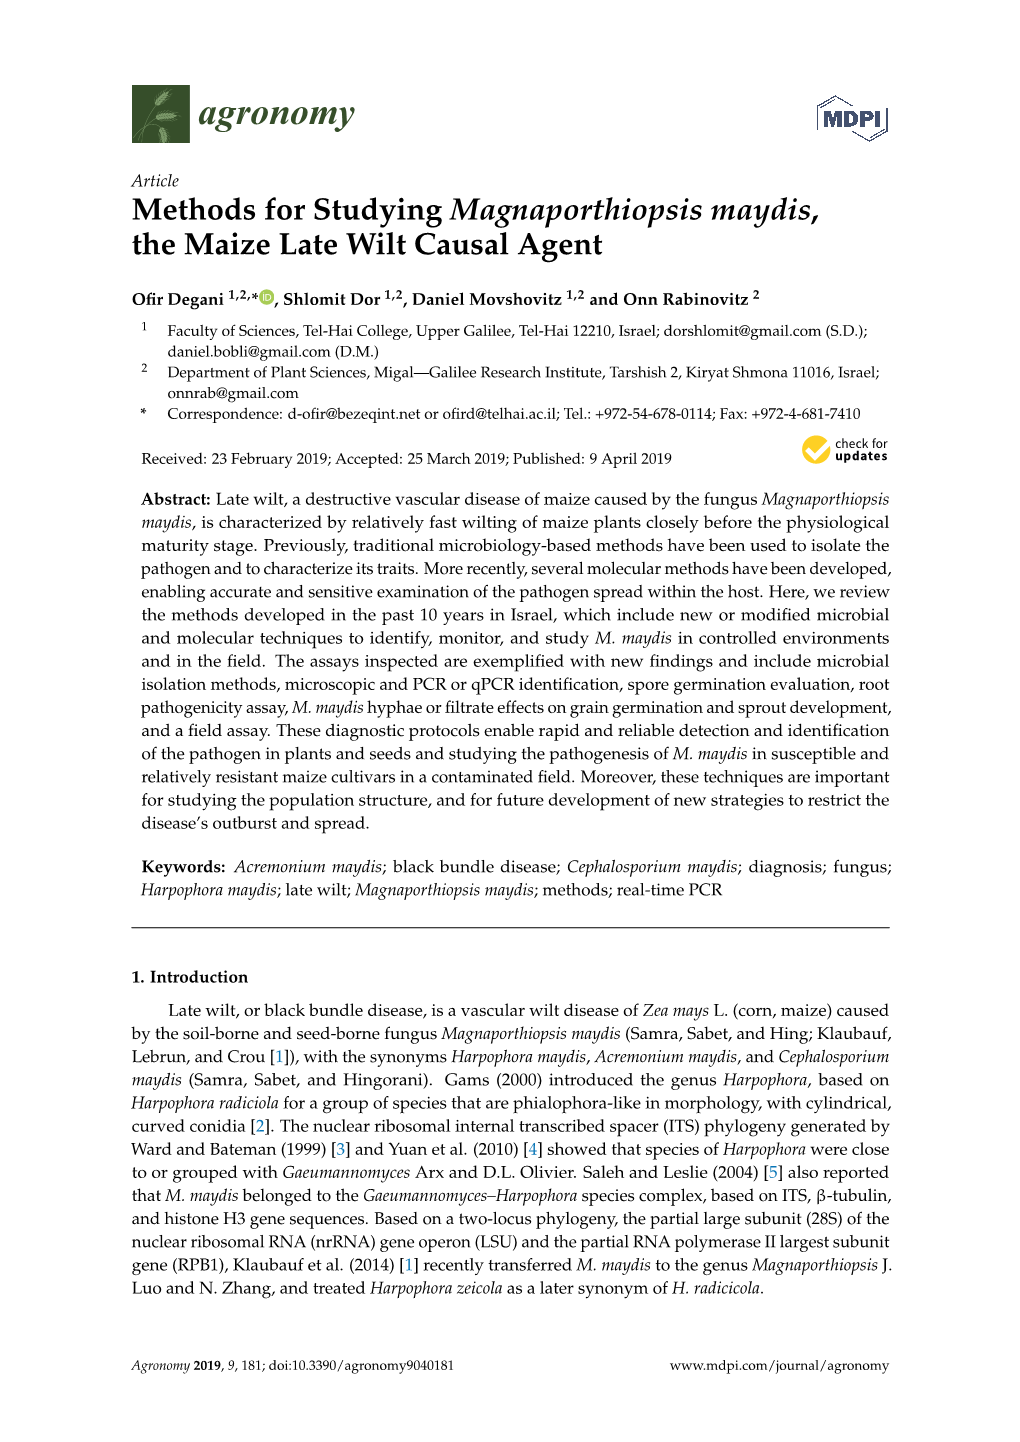 Methods for Studying Magnaporthiopsis Maydis, the Maize Late Wilt Causal Agent